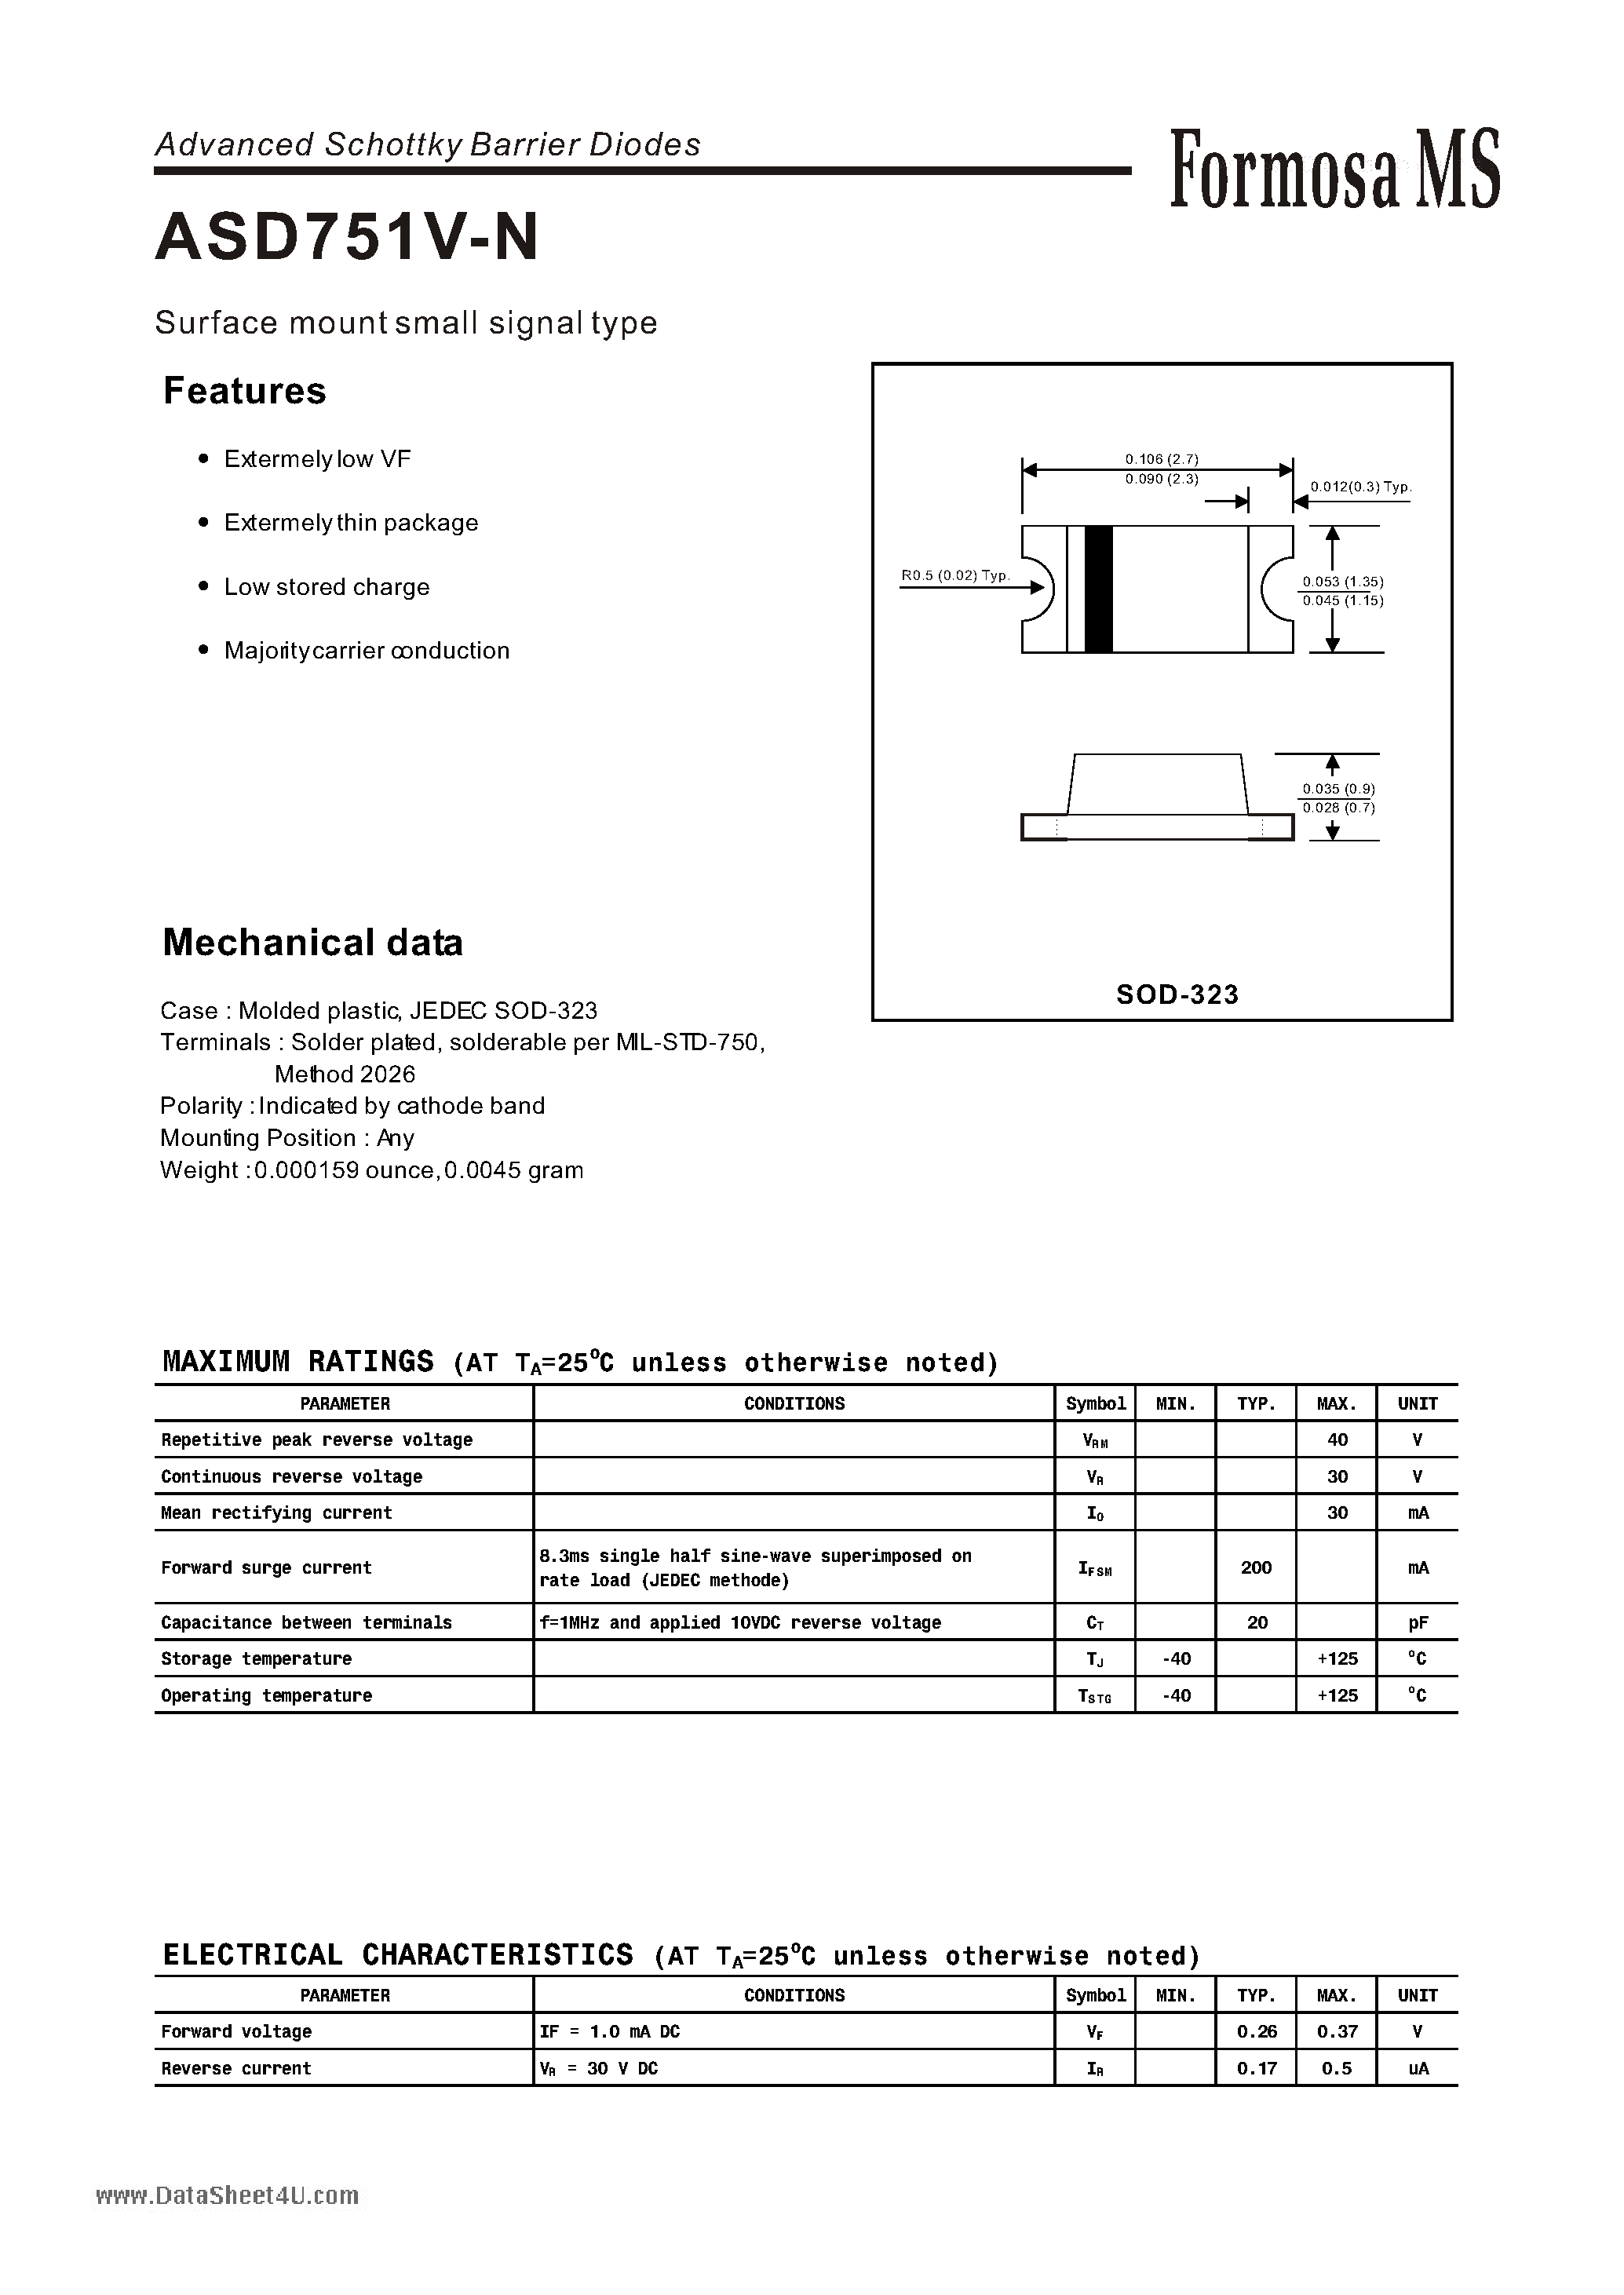 Datasheet ASD751V-N - Advanced Schottky Barrier Diodes page 1